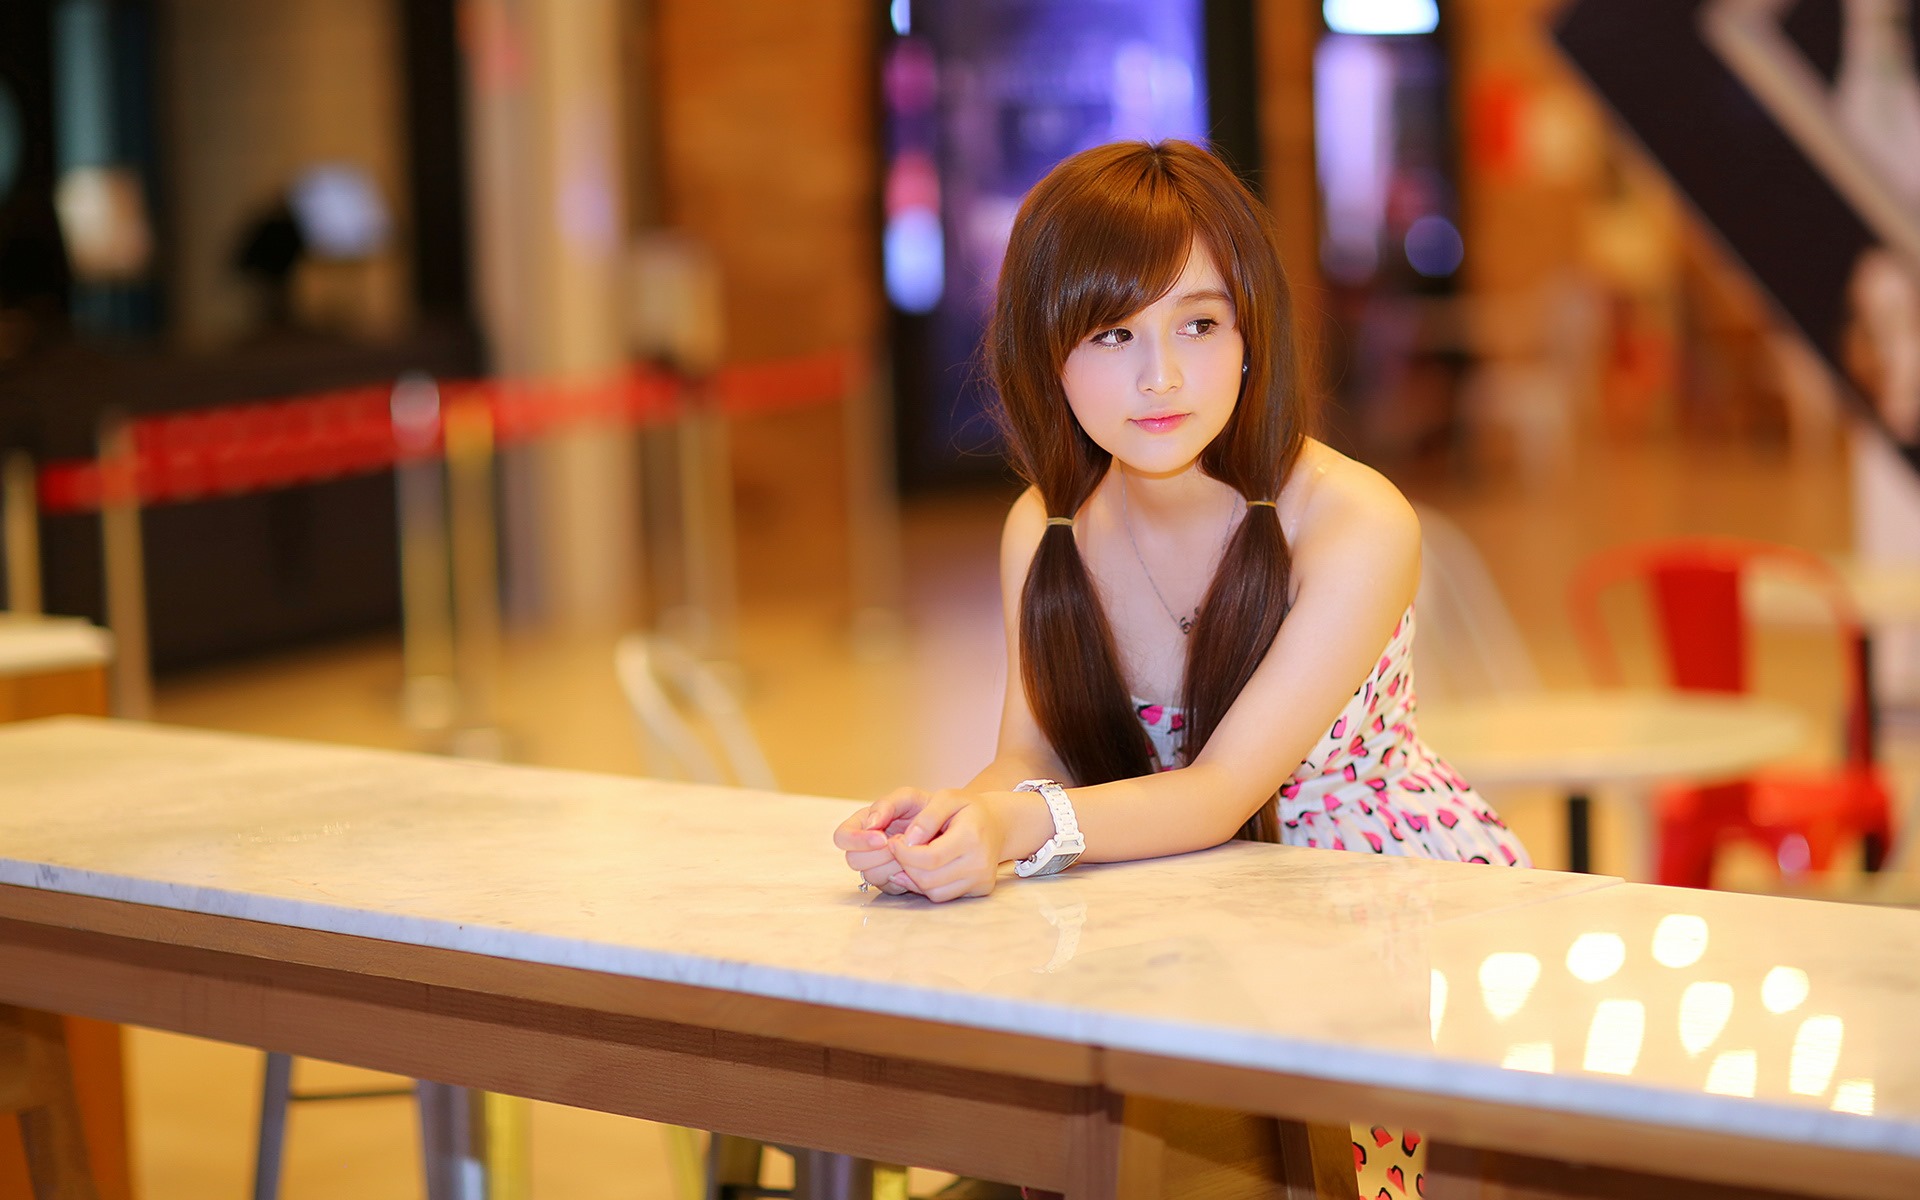 Pure and lovely young Asian girl HD wallpapers collection (2) #38 - 1920x1200